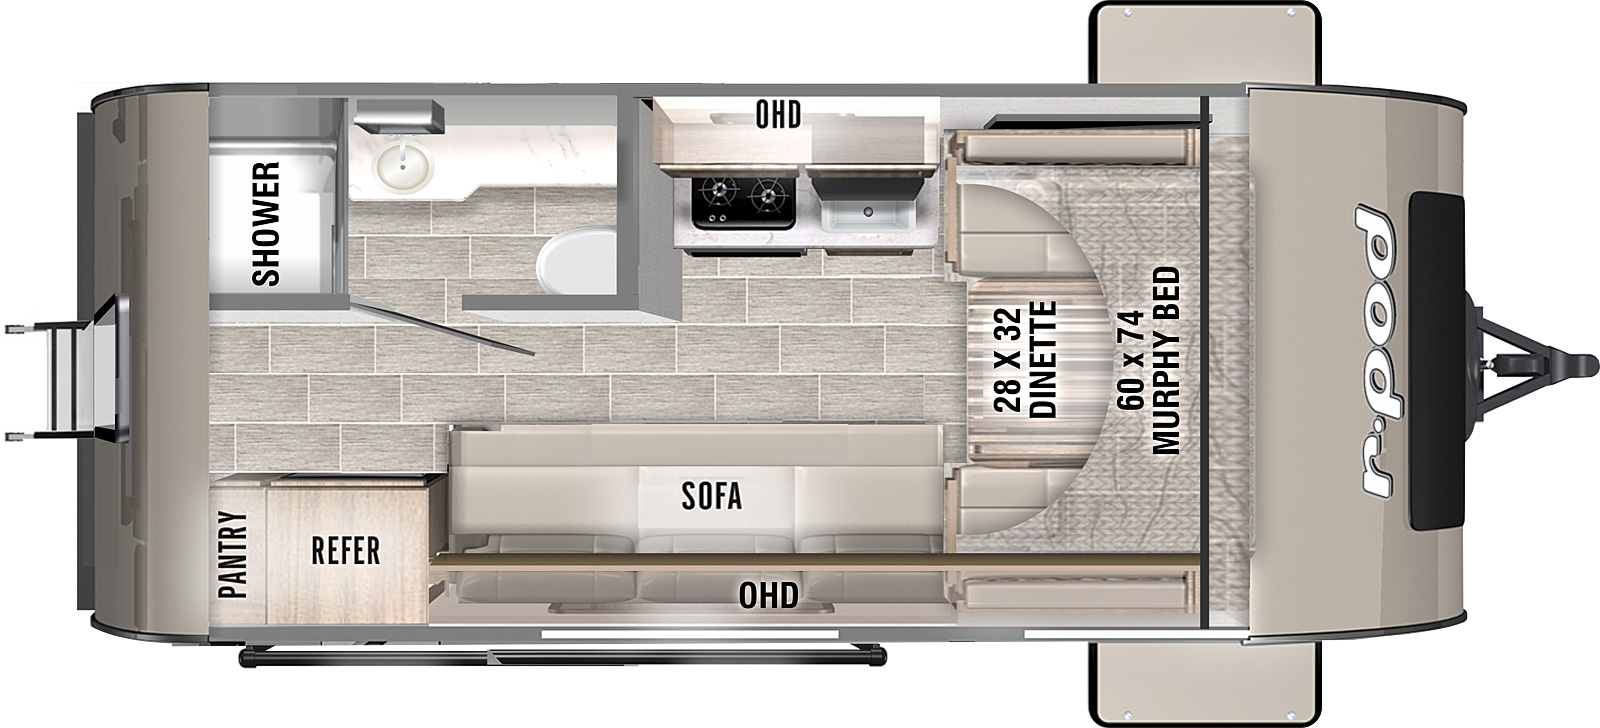 r-pod RP-153 floorplan. The RP-153 has no slide outs and one entry door.